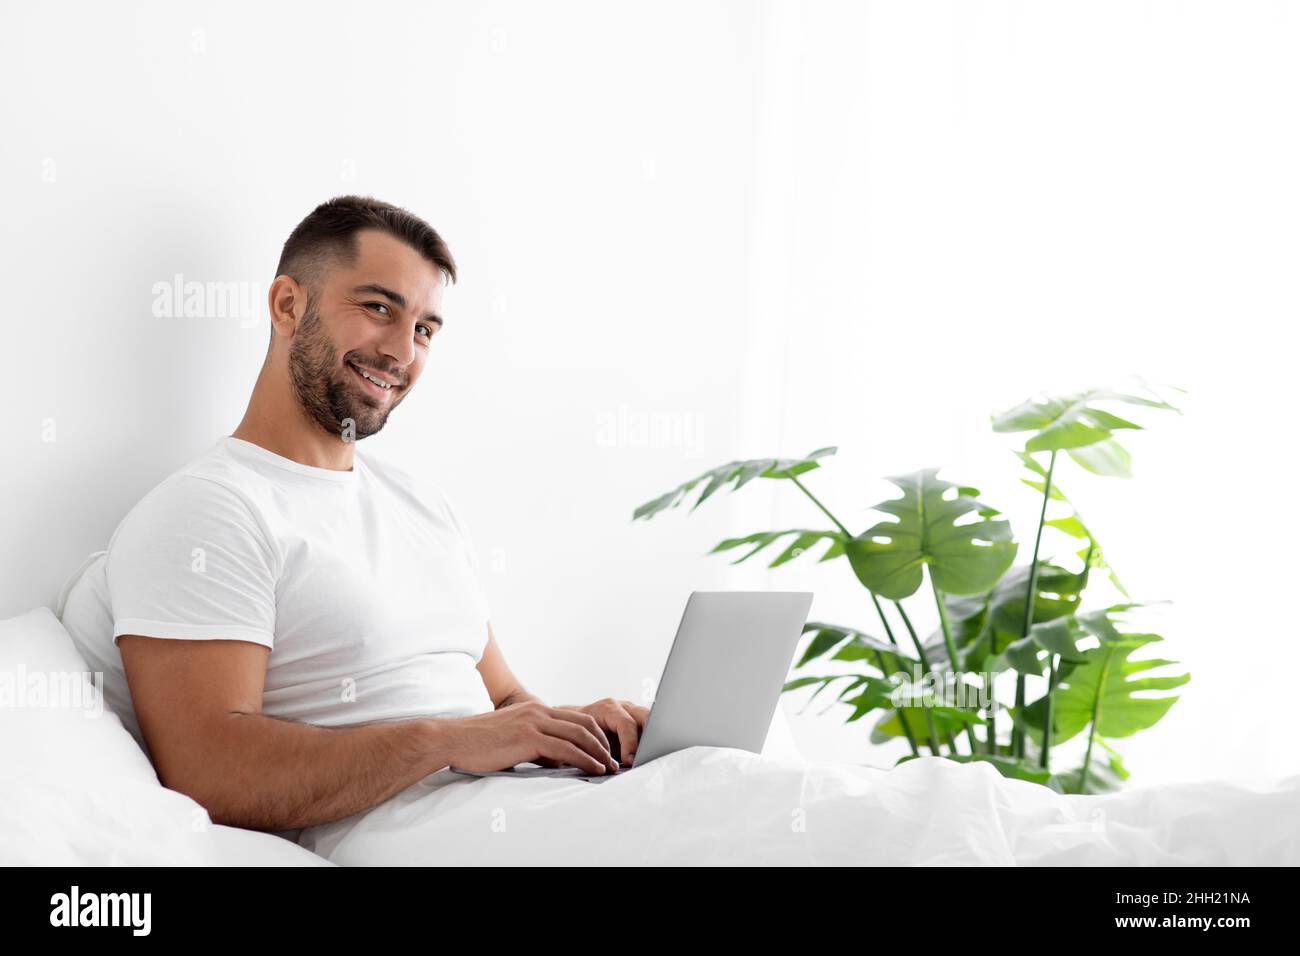 Smiling millennial attractive male manager with beard works on computer Stock Photo